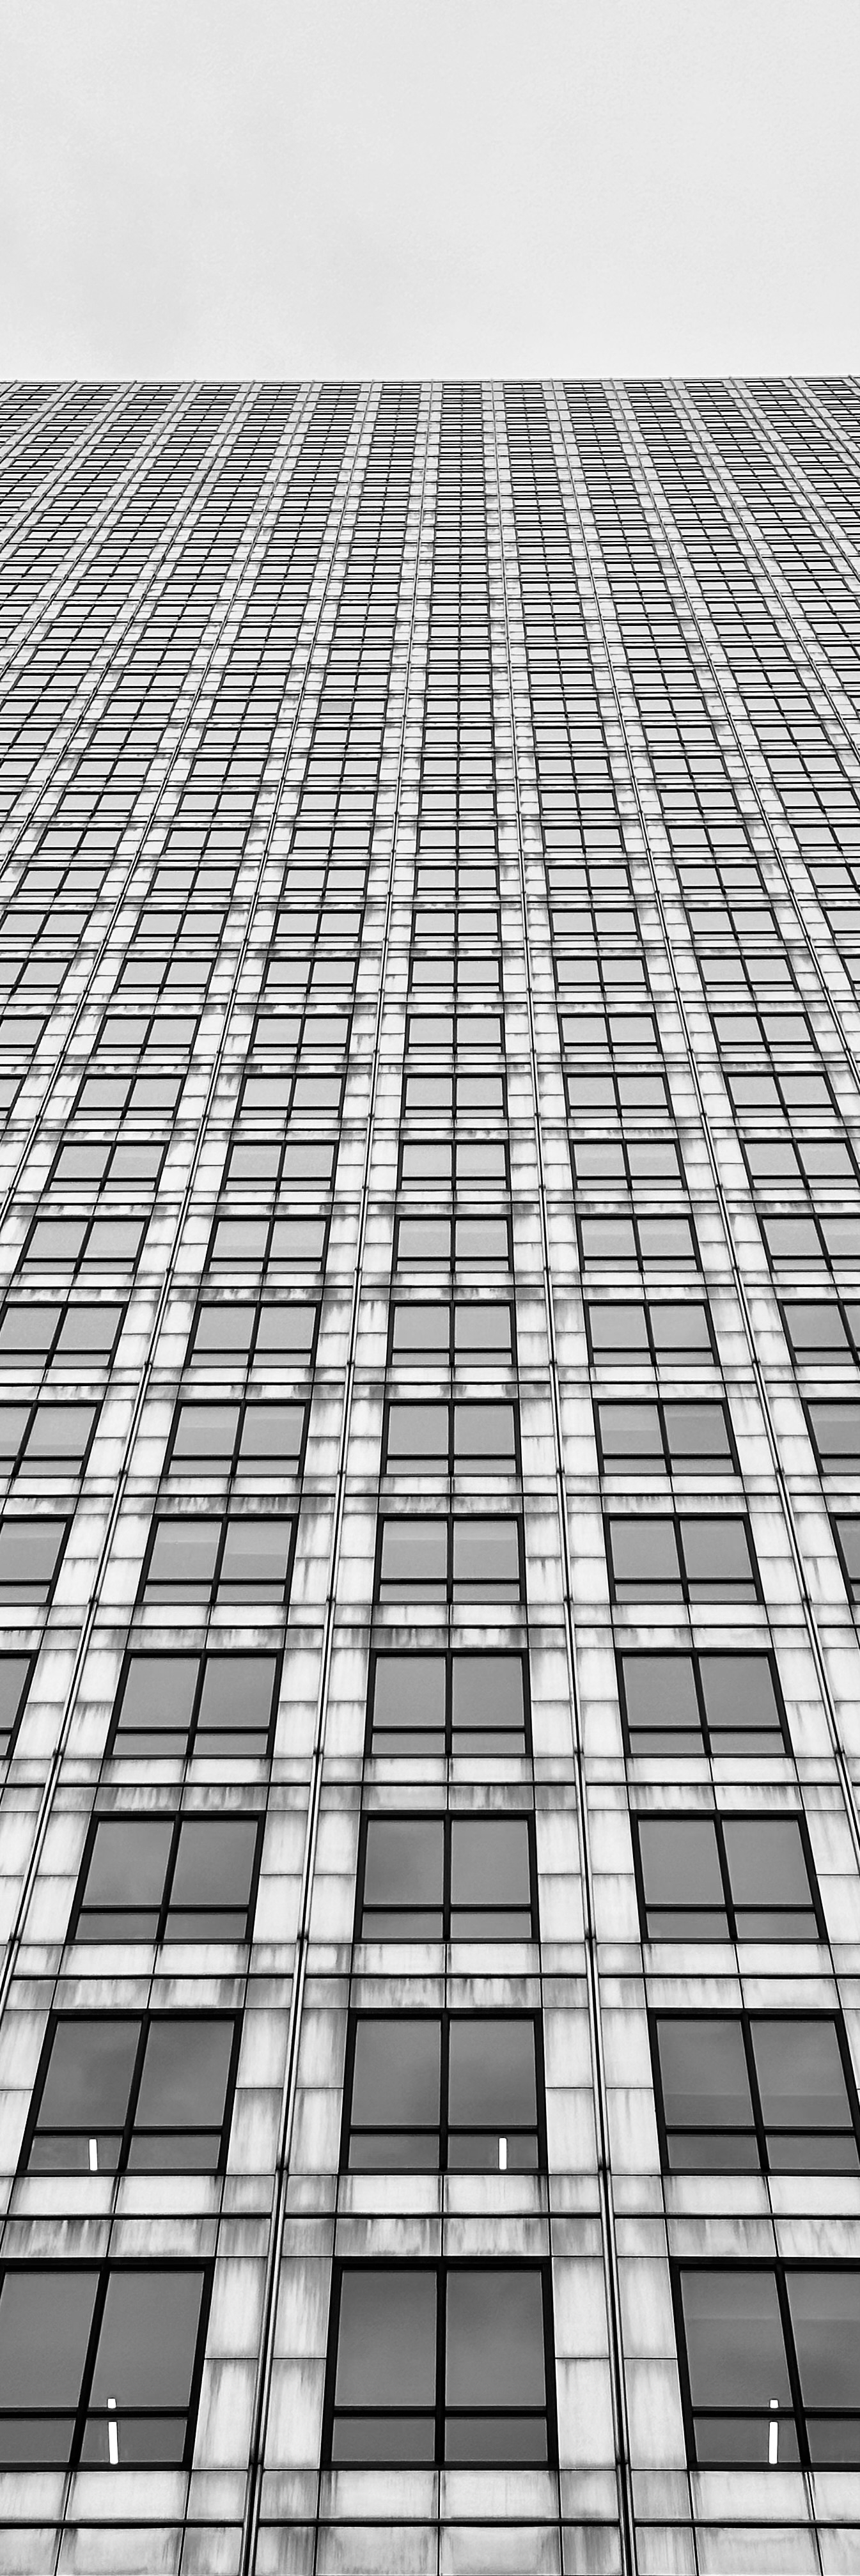 Black and white photo looking up at a skyscraper, soaring in to the sky.